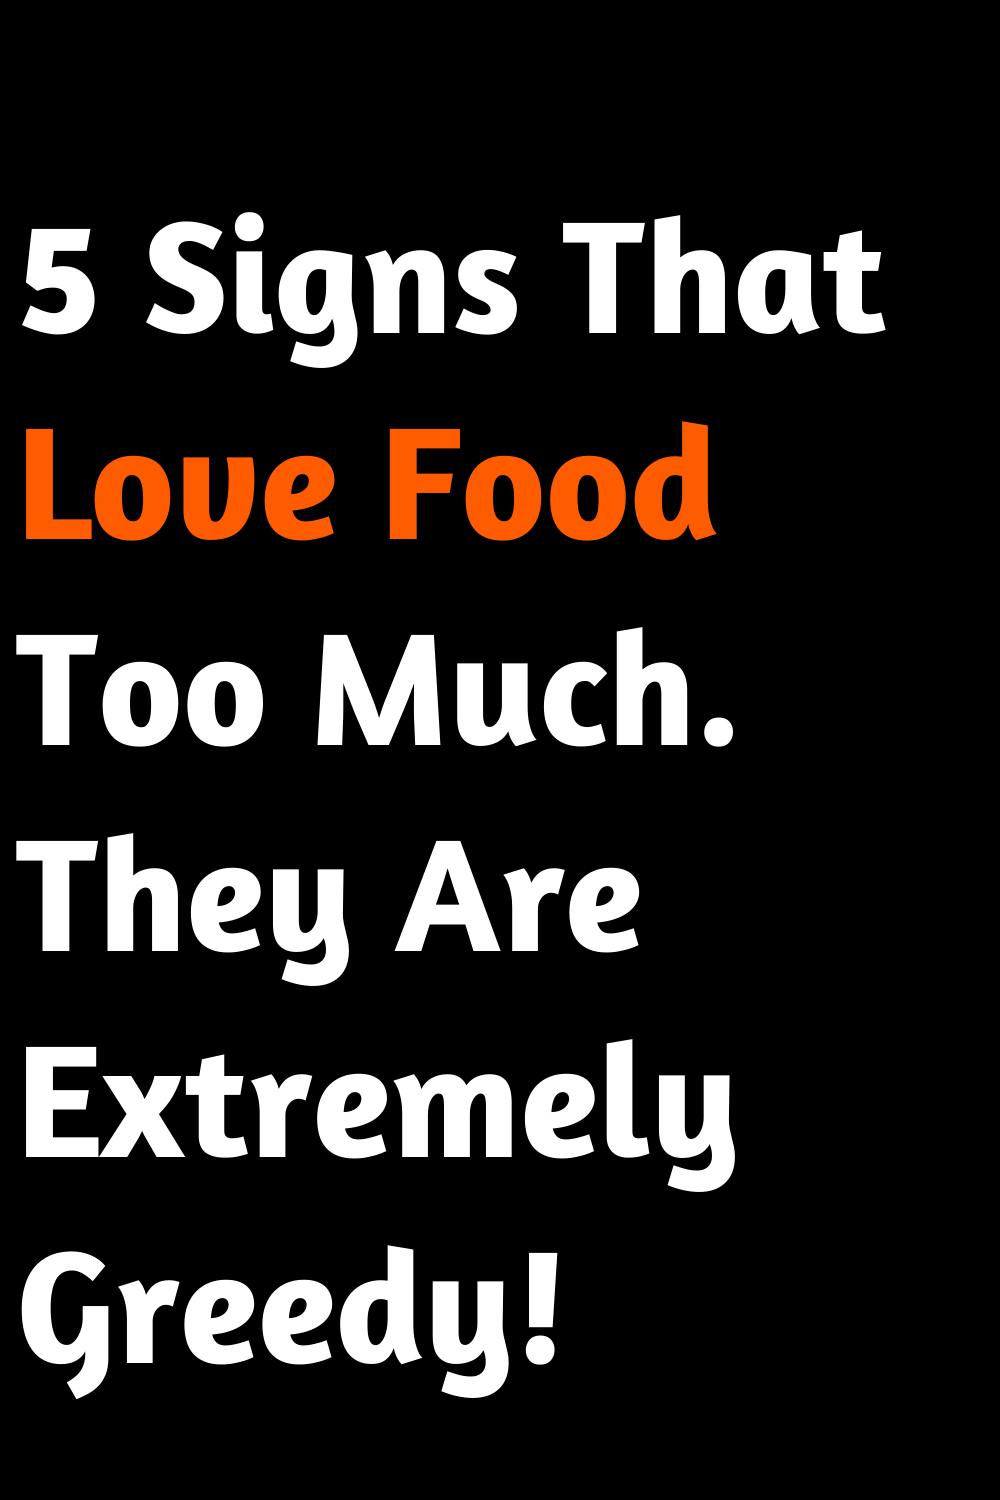 5 Signs That Love Food Too Much. They Are Extremely Greedy!